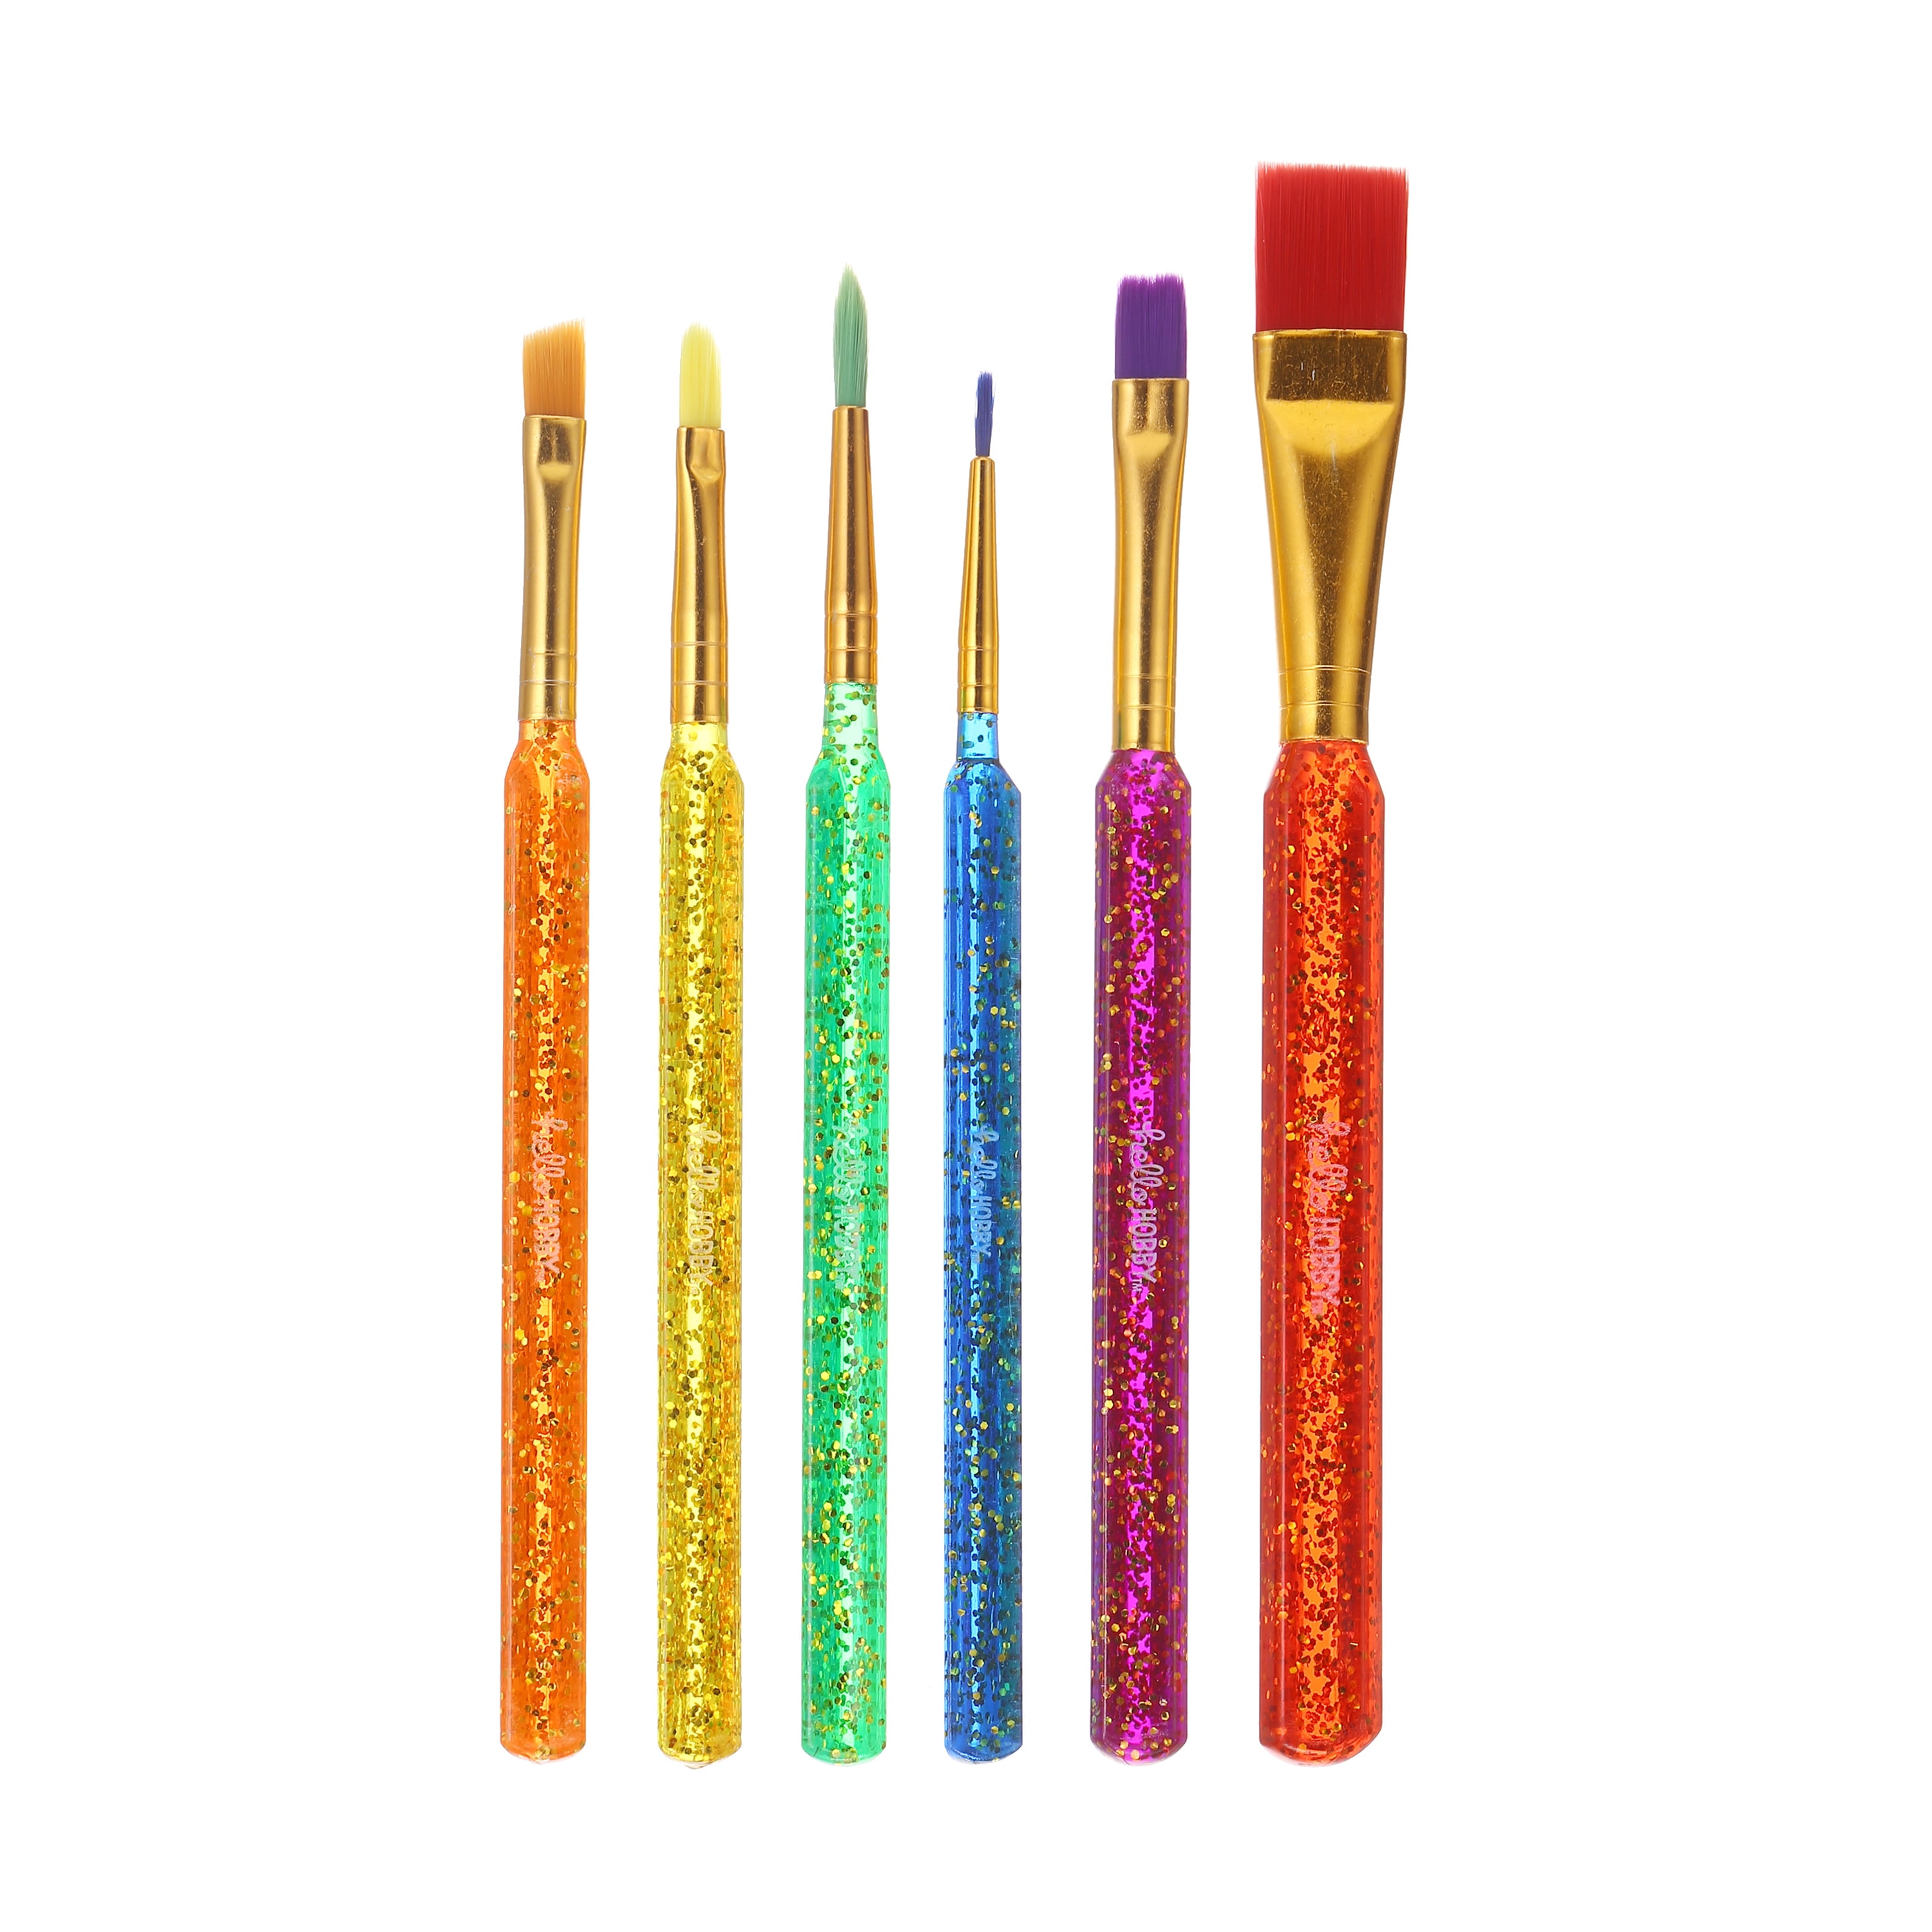 Hello Hobby Spill-Proof Craft Paint Cup with Color Hog Bristle Paint  Brushes, 8pcs in Total